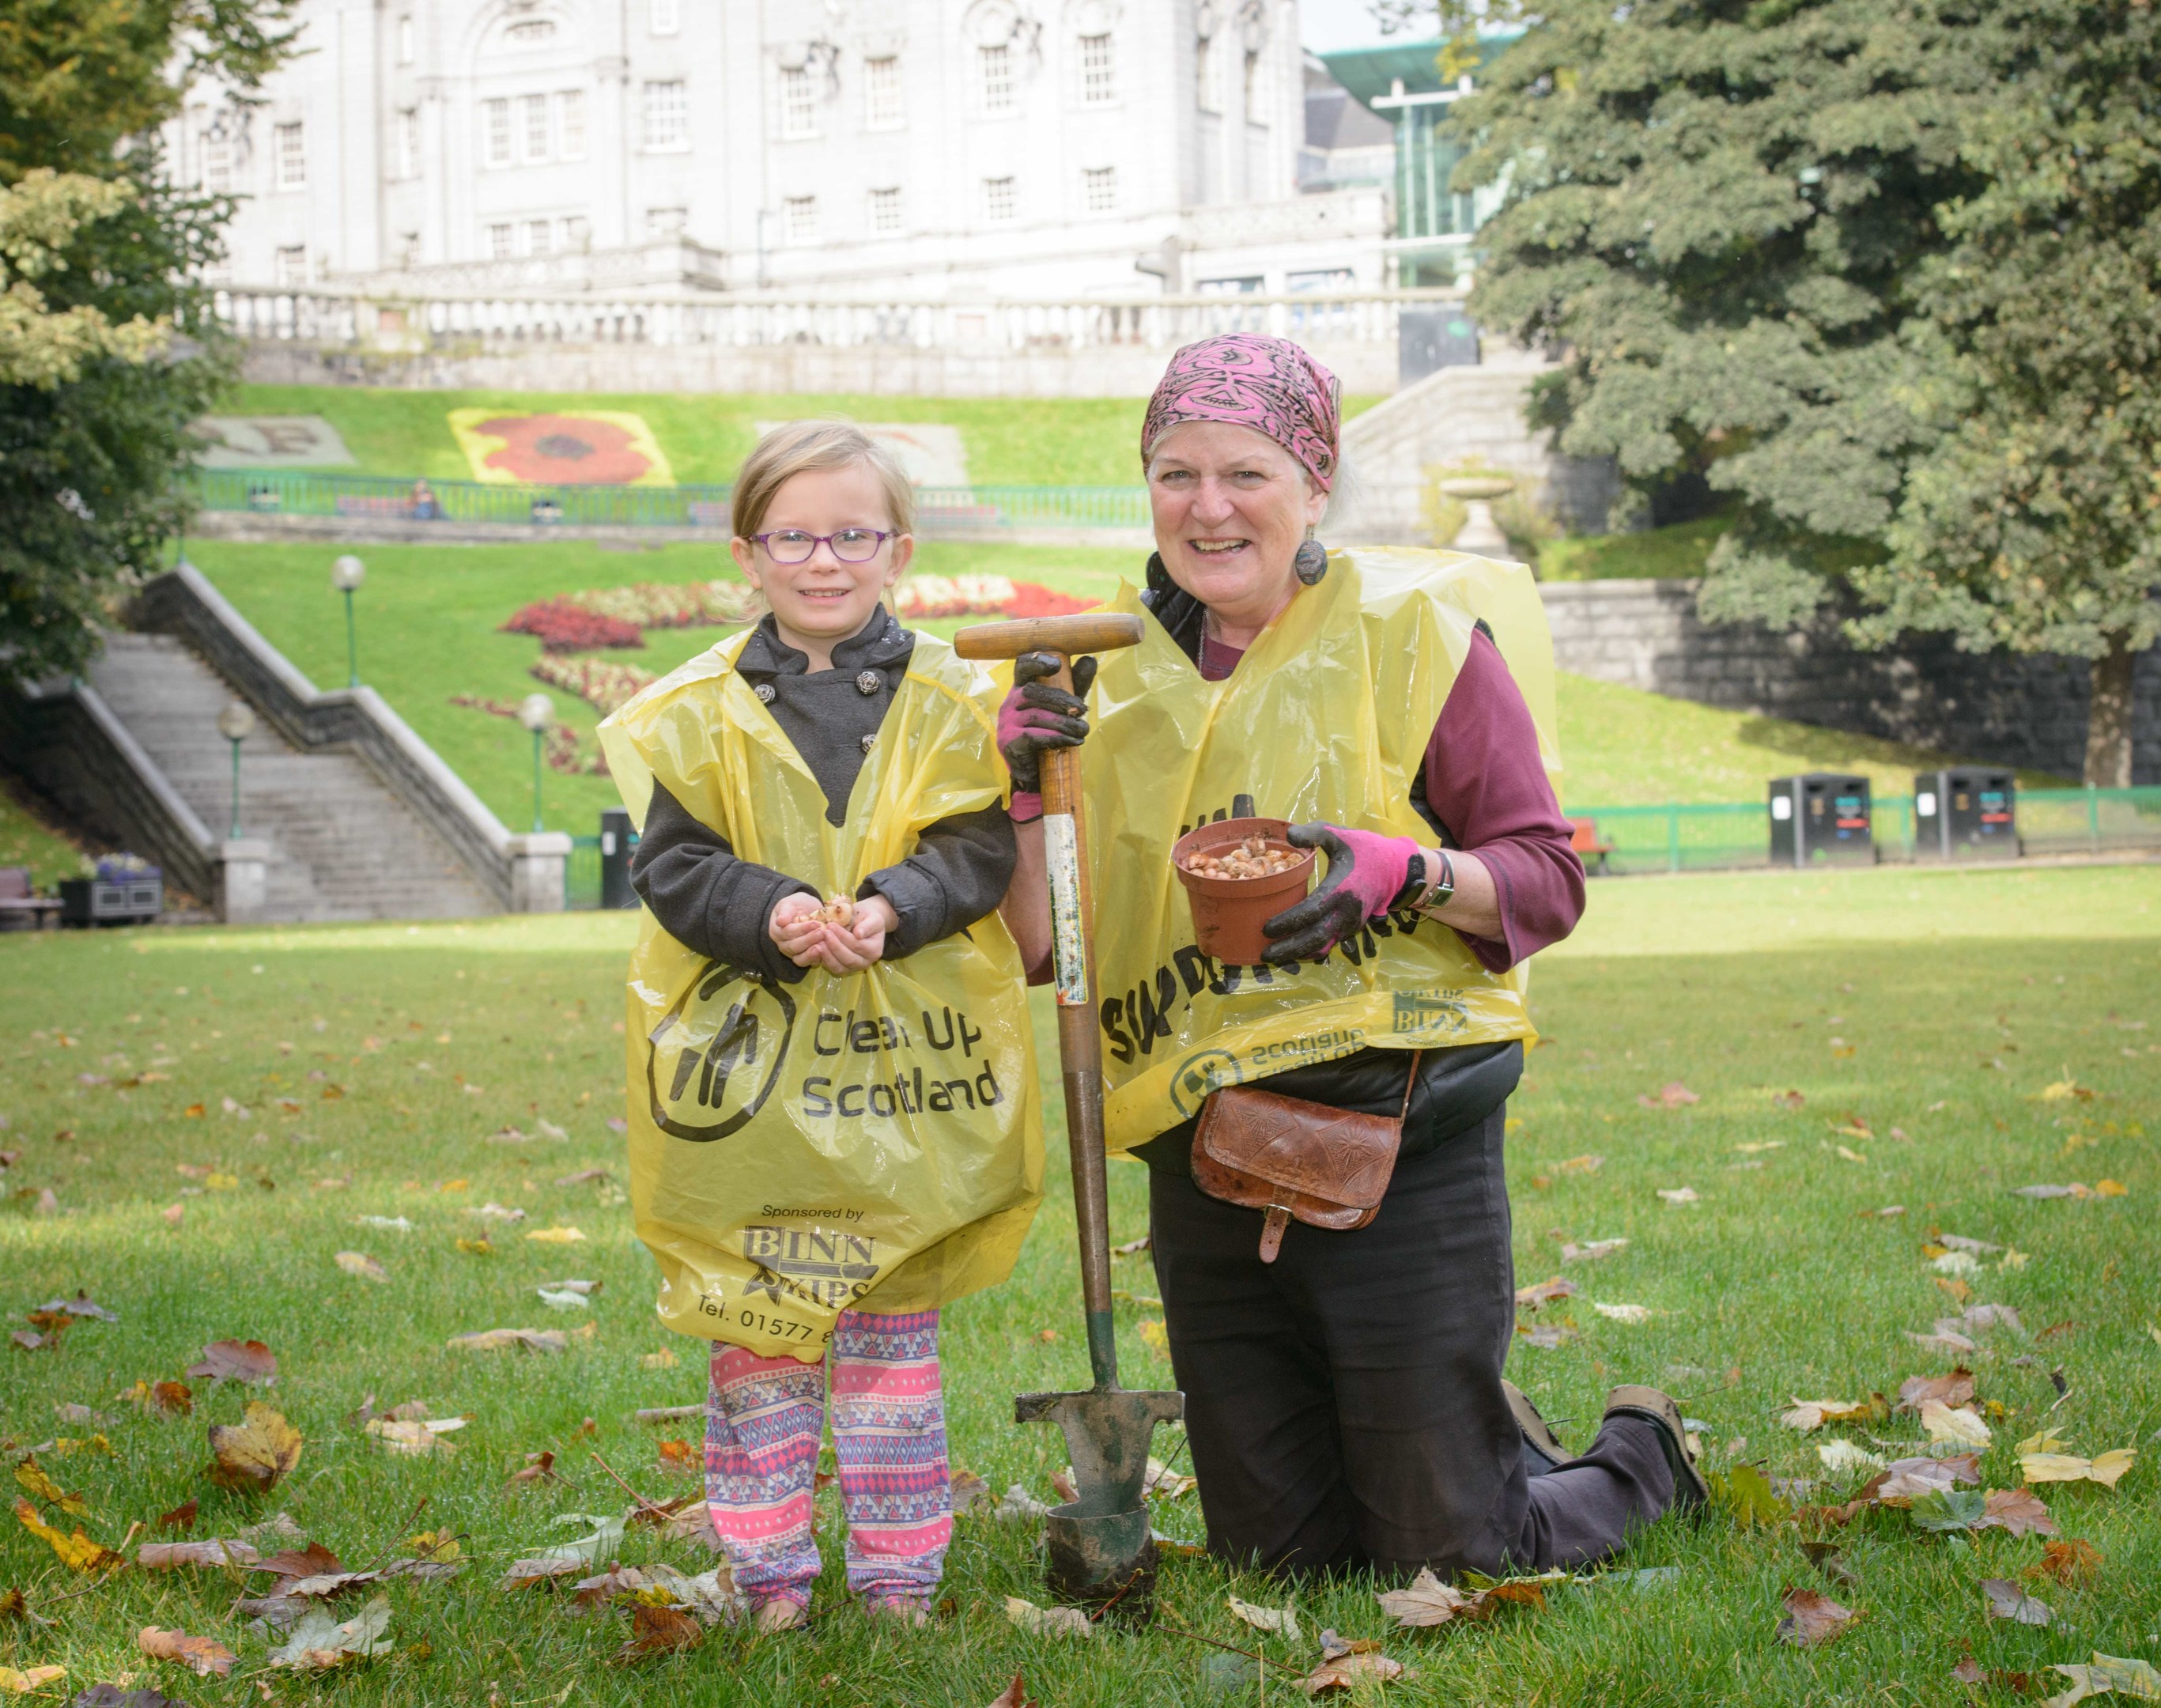 Green-fingered volunteers helped plant around 50,000 bulbs at Union Terrace Gardens